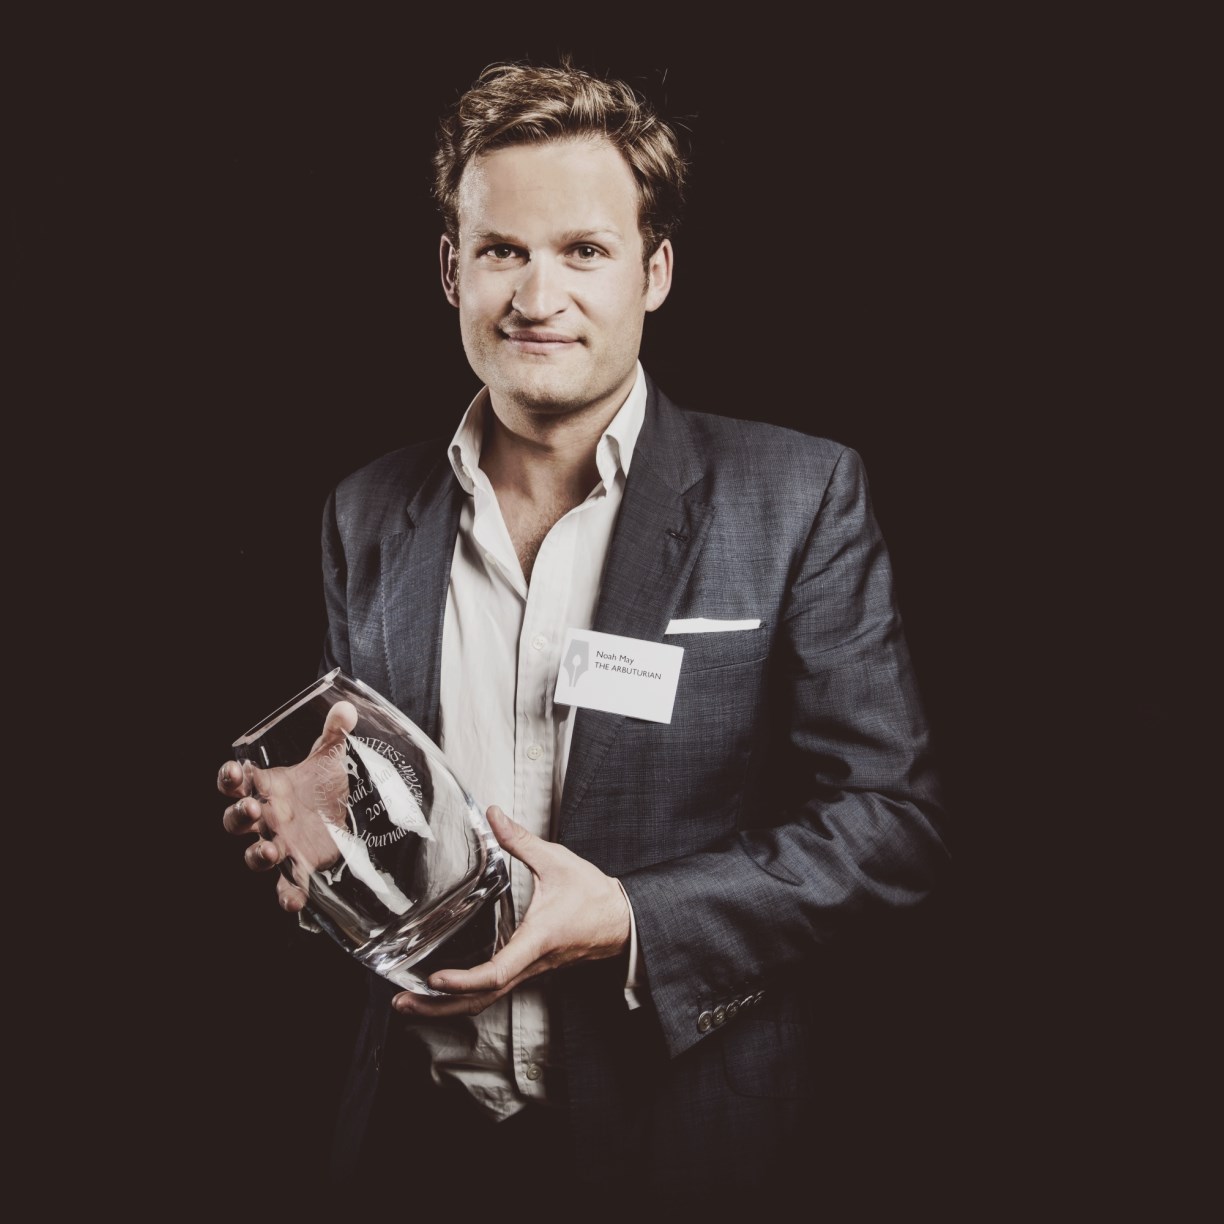 Noah May (winner of the Food Journalist of the Year Award)